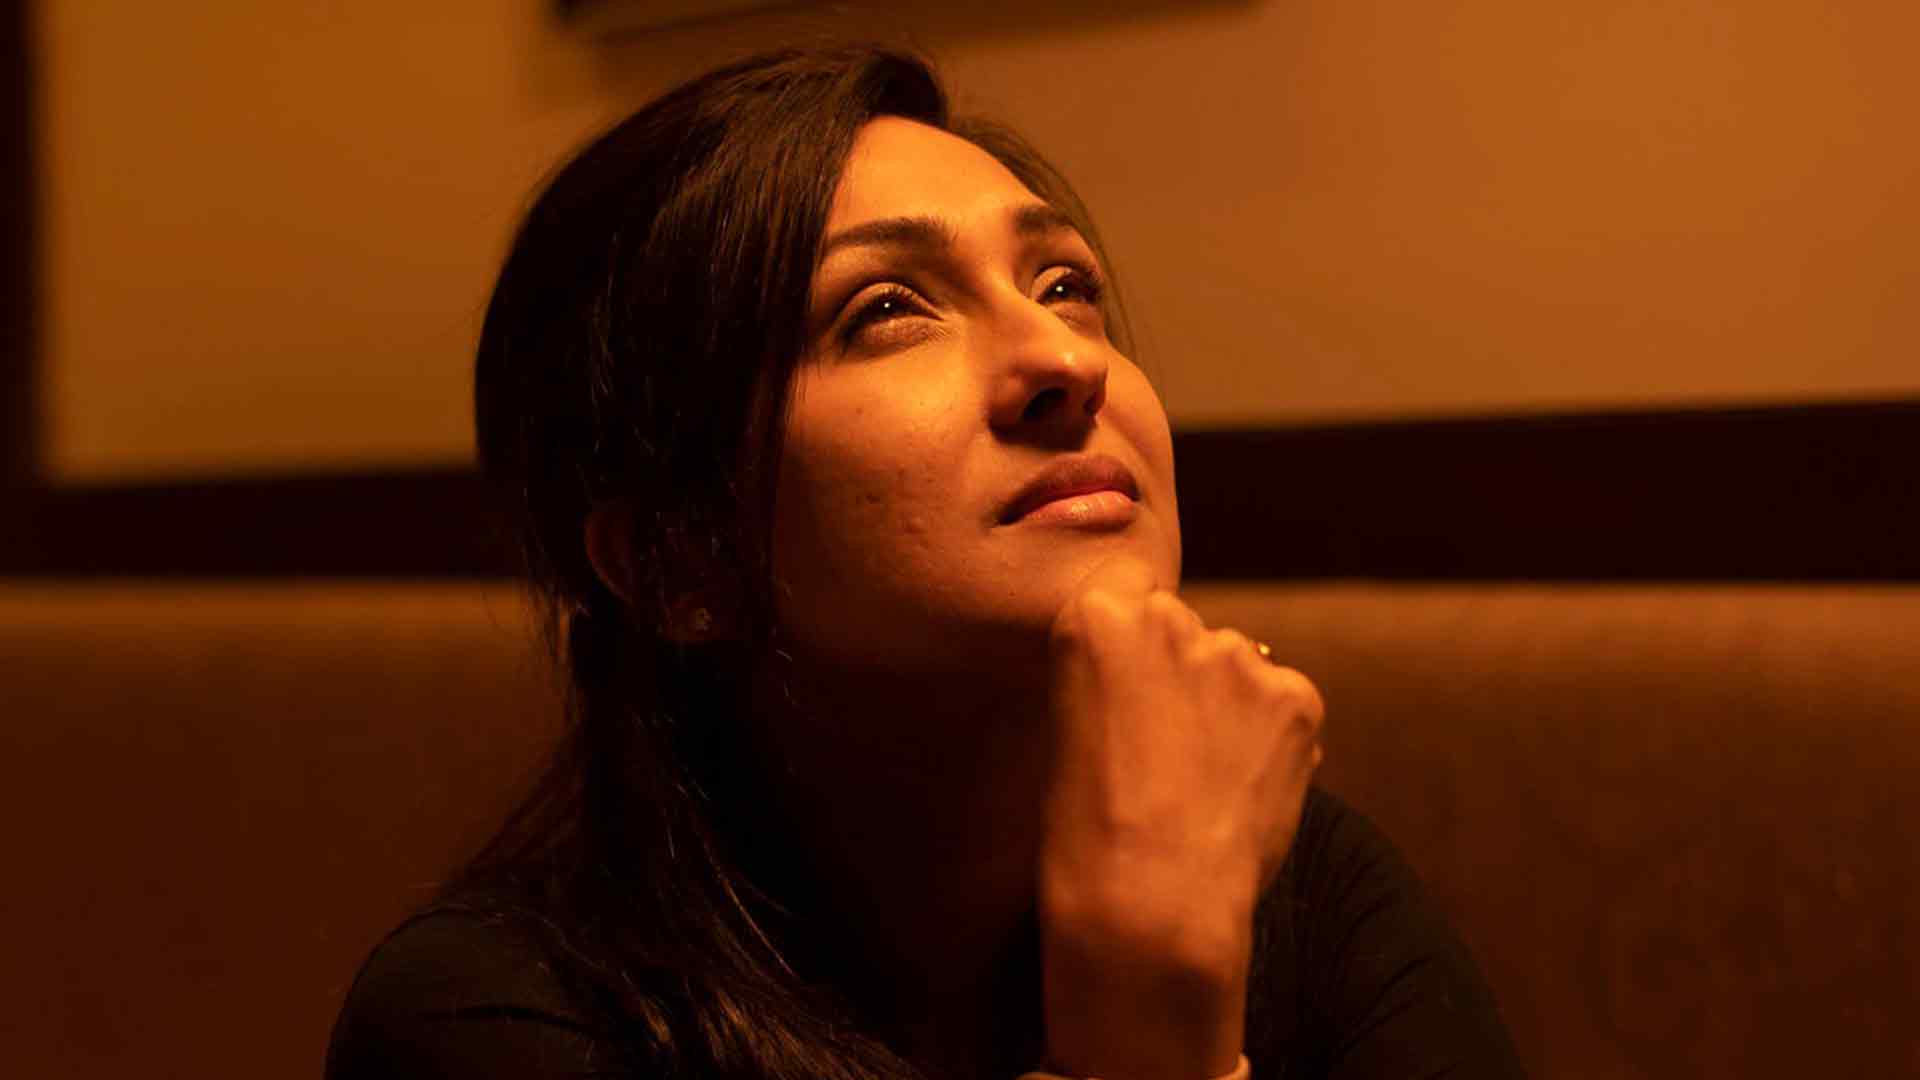 Unfortunately, the makers have not provided any information regarding the movie's cast or the start date of the shooting, apart from mentioning Rituparna.